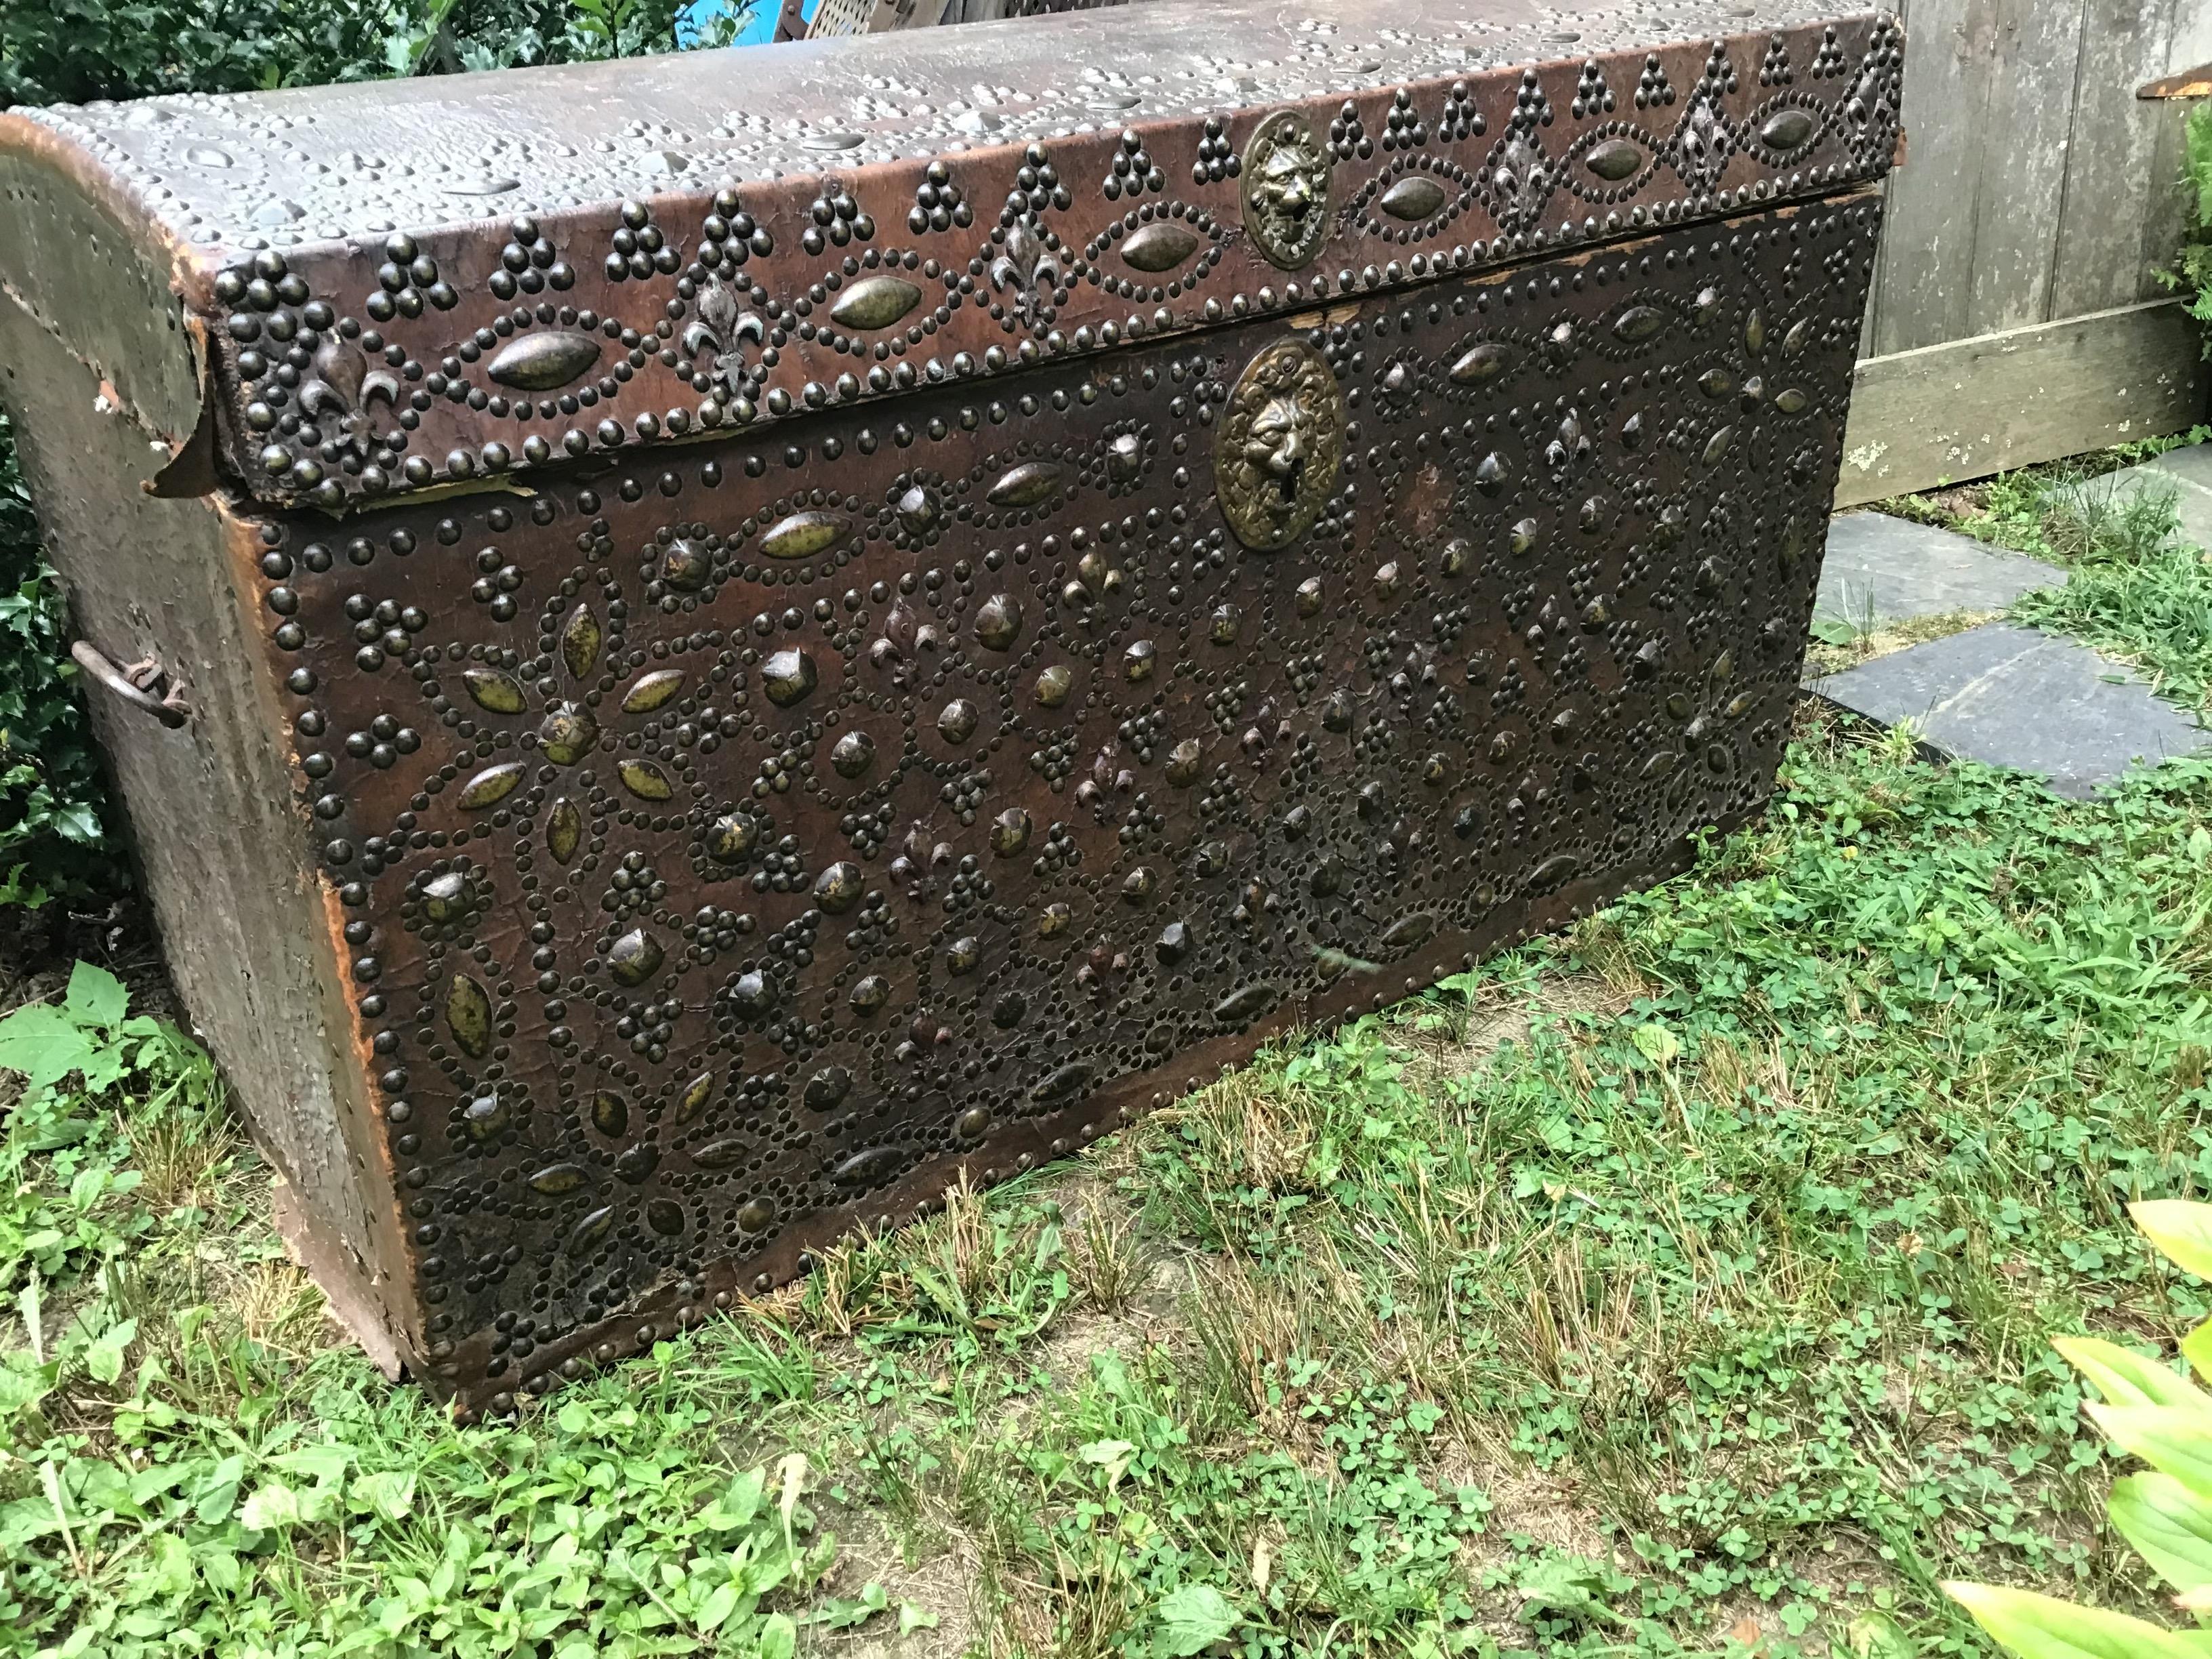 Antique French trunk, traveling trunk, domed top trunk, leather, ornate studded,
Fleur De Lys, 1700's trunk, with lion escutcheon.
   